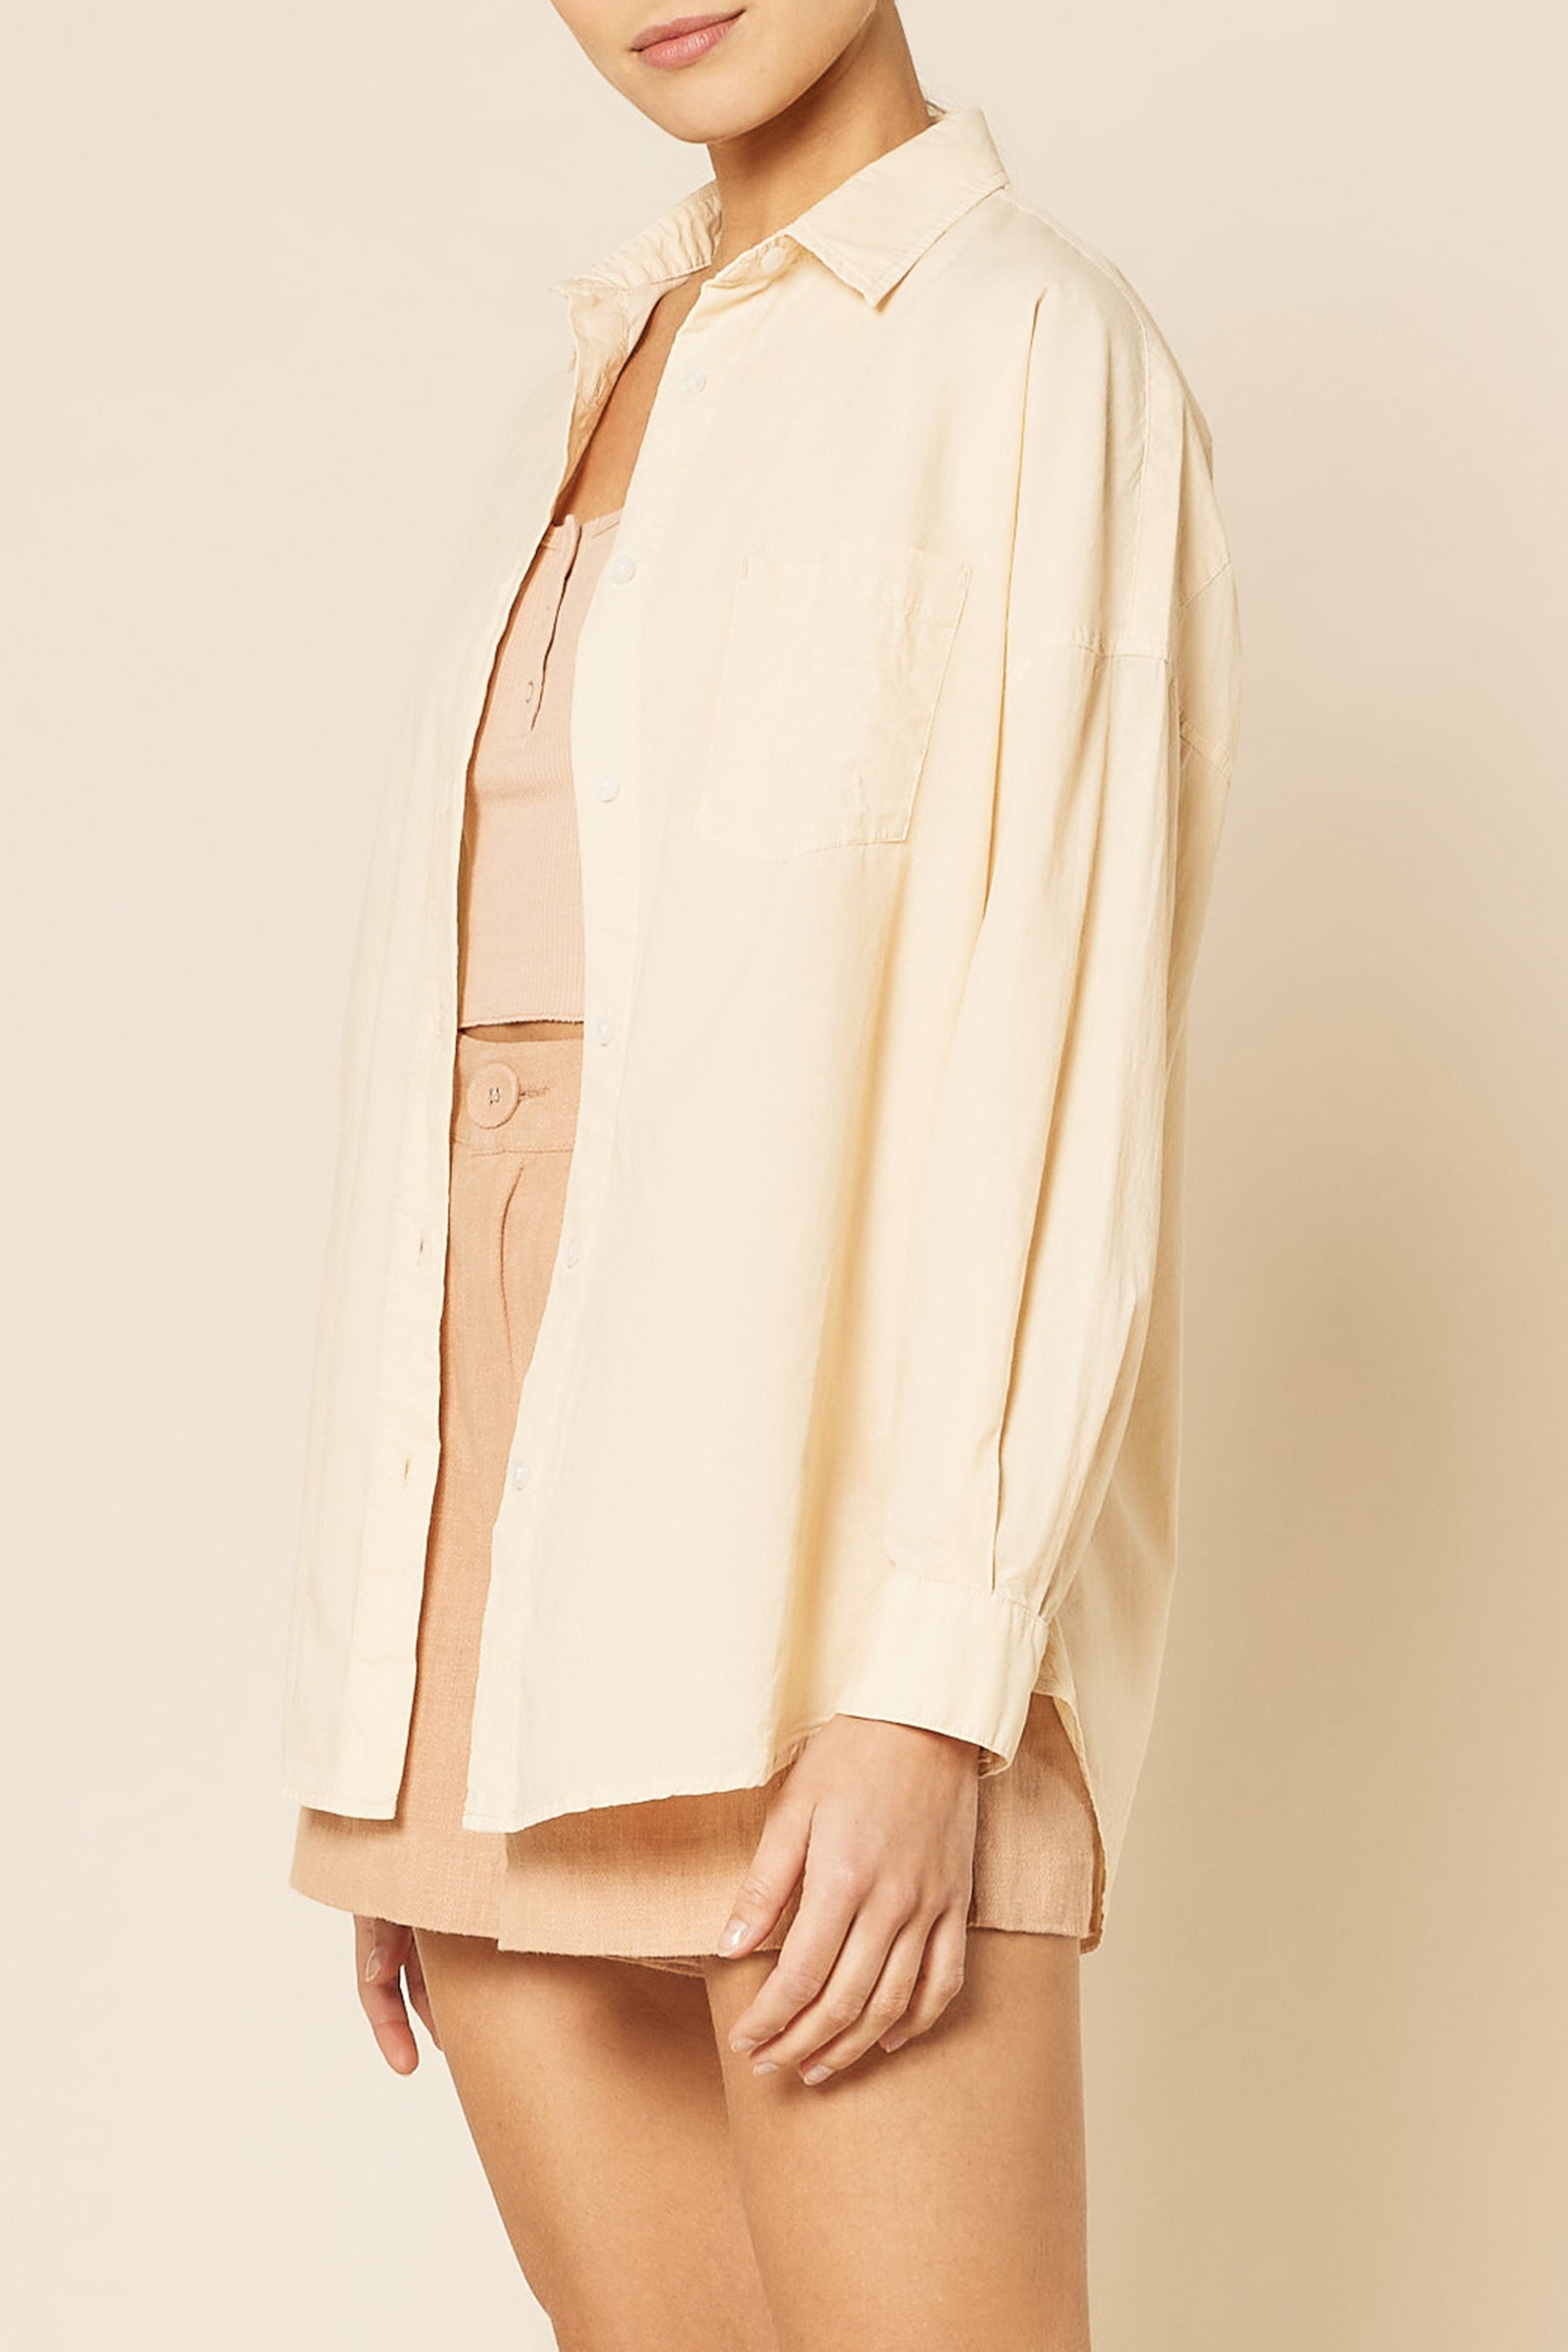 Nude Lucy Naya Washed Cotton Shirt In a Light Brown Butter Colour 